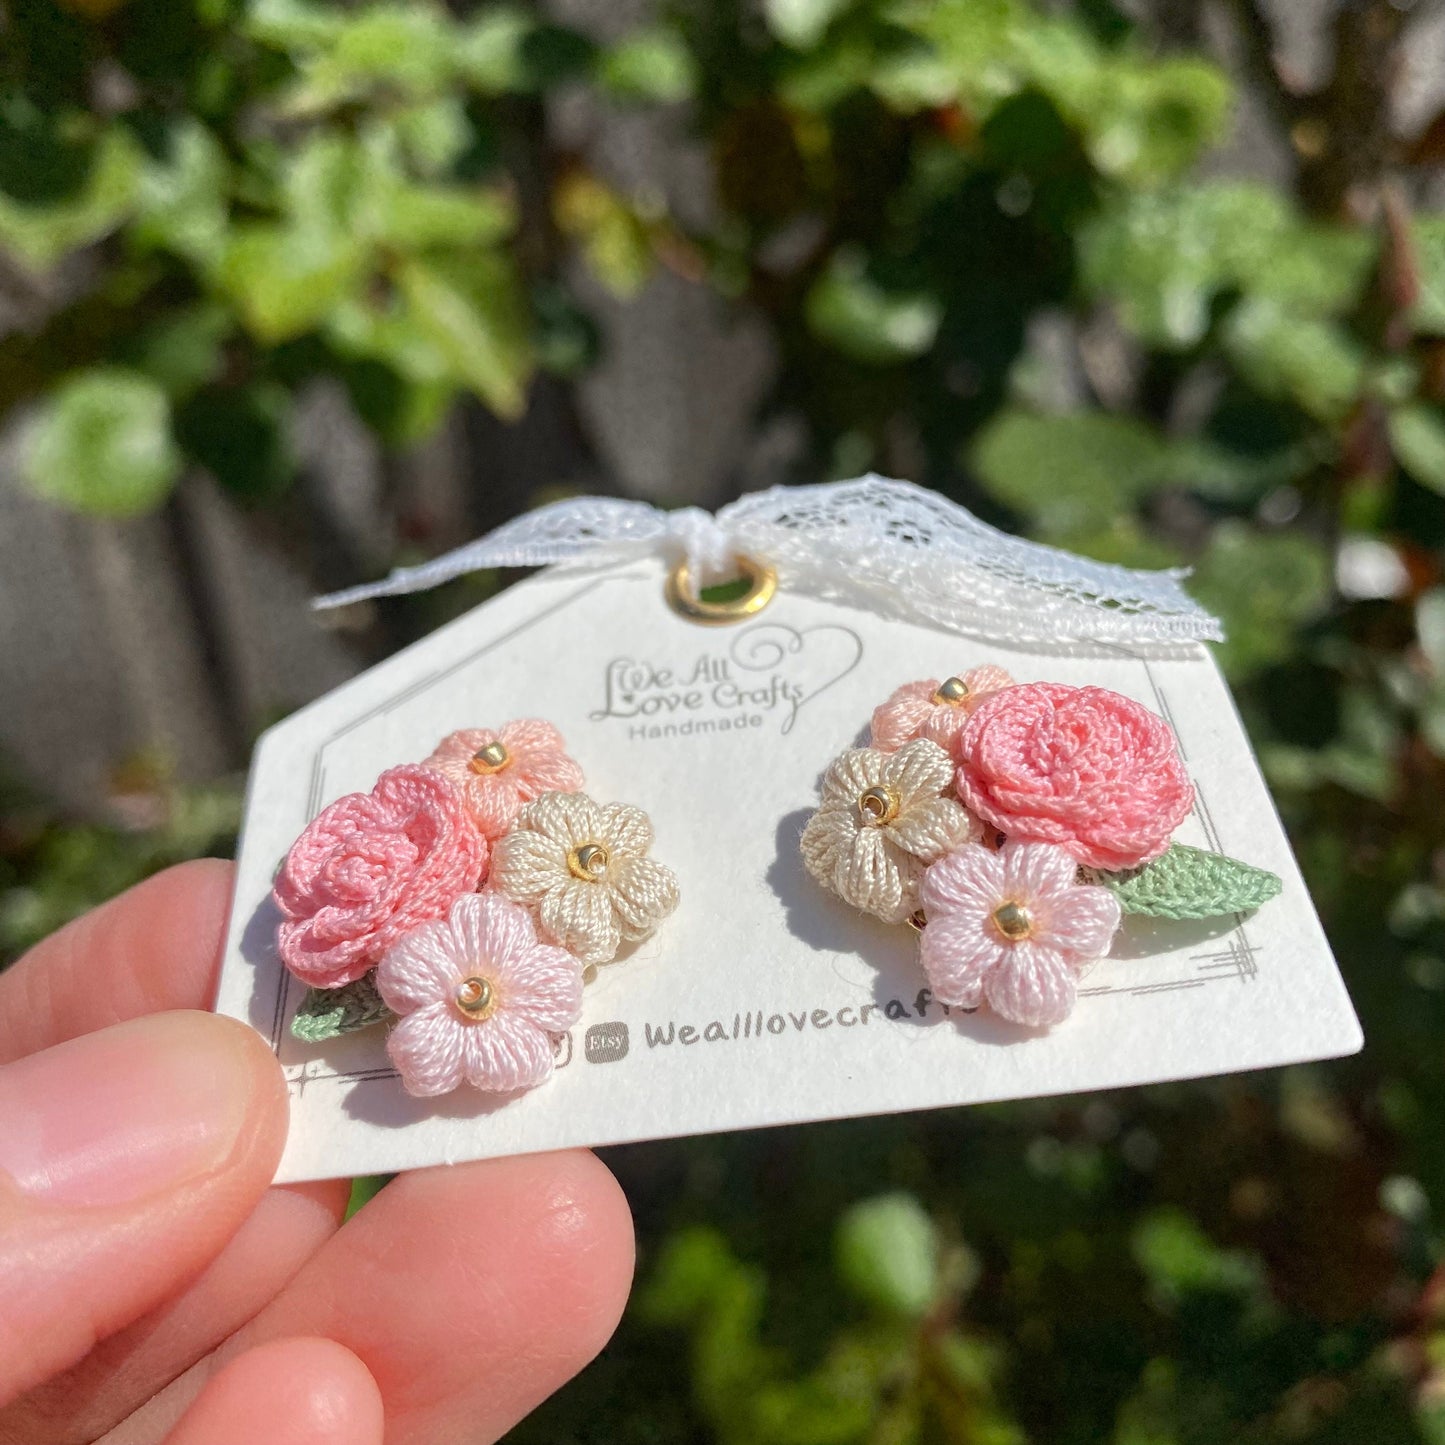 Pink Floral bouquet bundle Studs/Microcrochet/14k gold earrings/Spring gift for her/Knitting handmade jewelry/Retro vintage/Ship from US